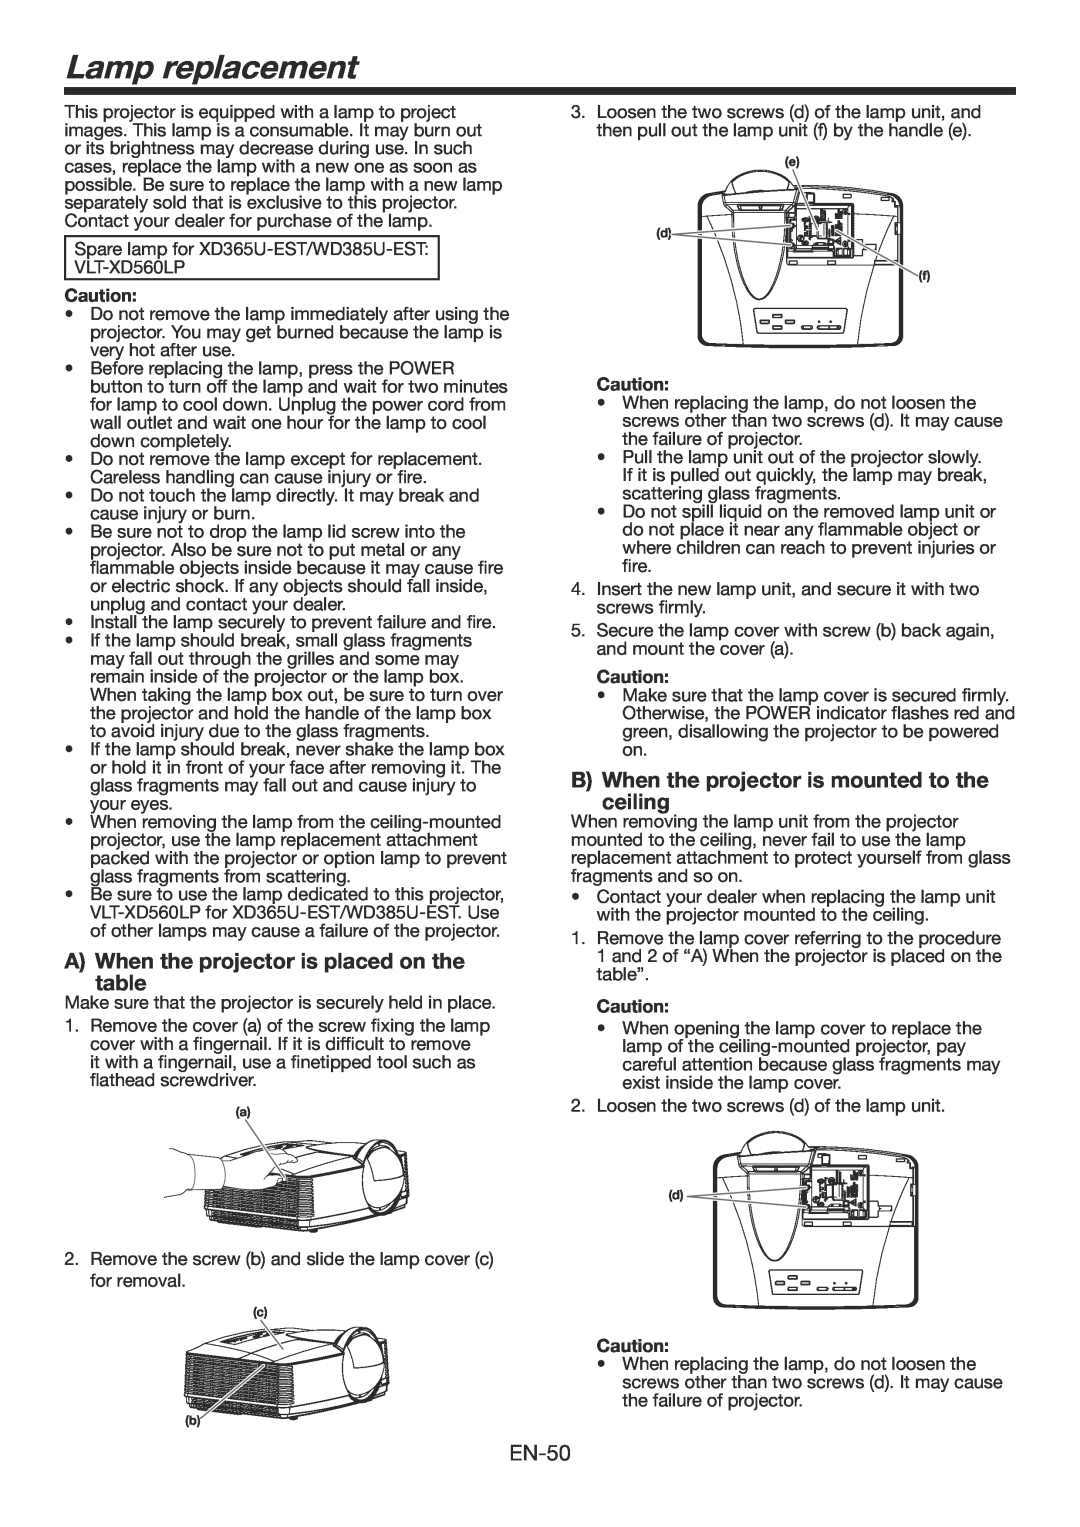 Mitsubishi Electronics WD385U-EST user manual Lamp replacement, A When the projector is placed on the table 